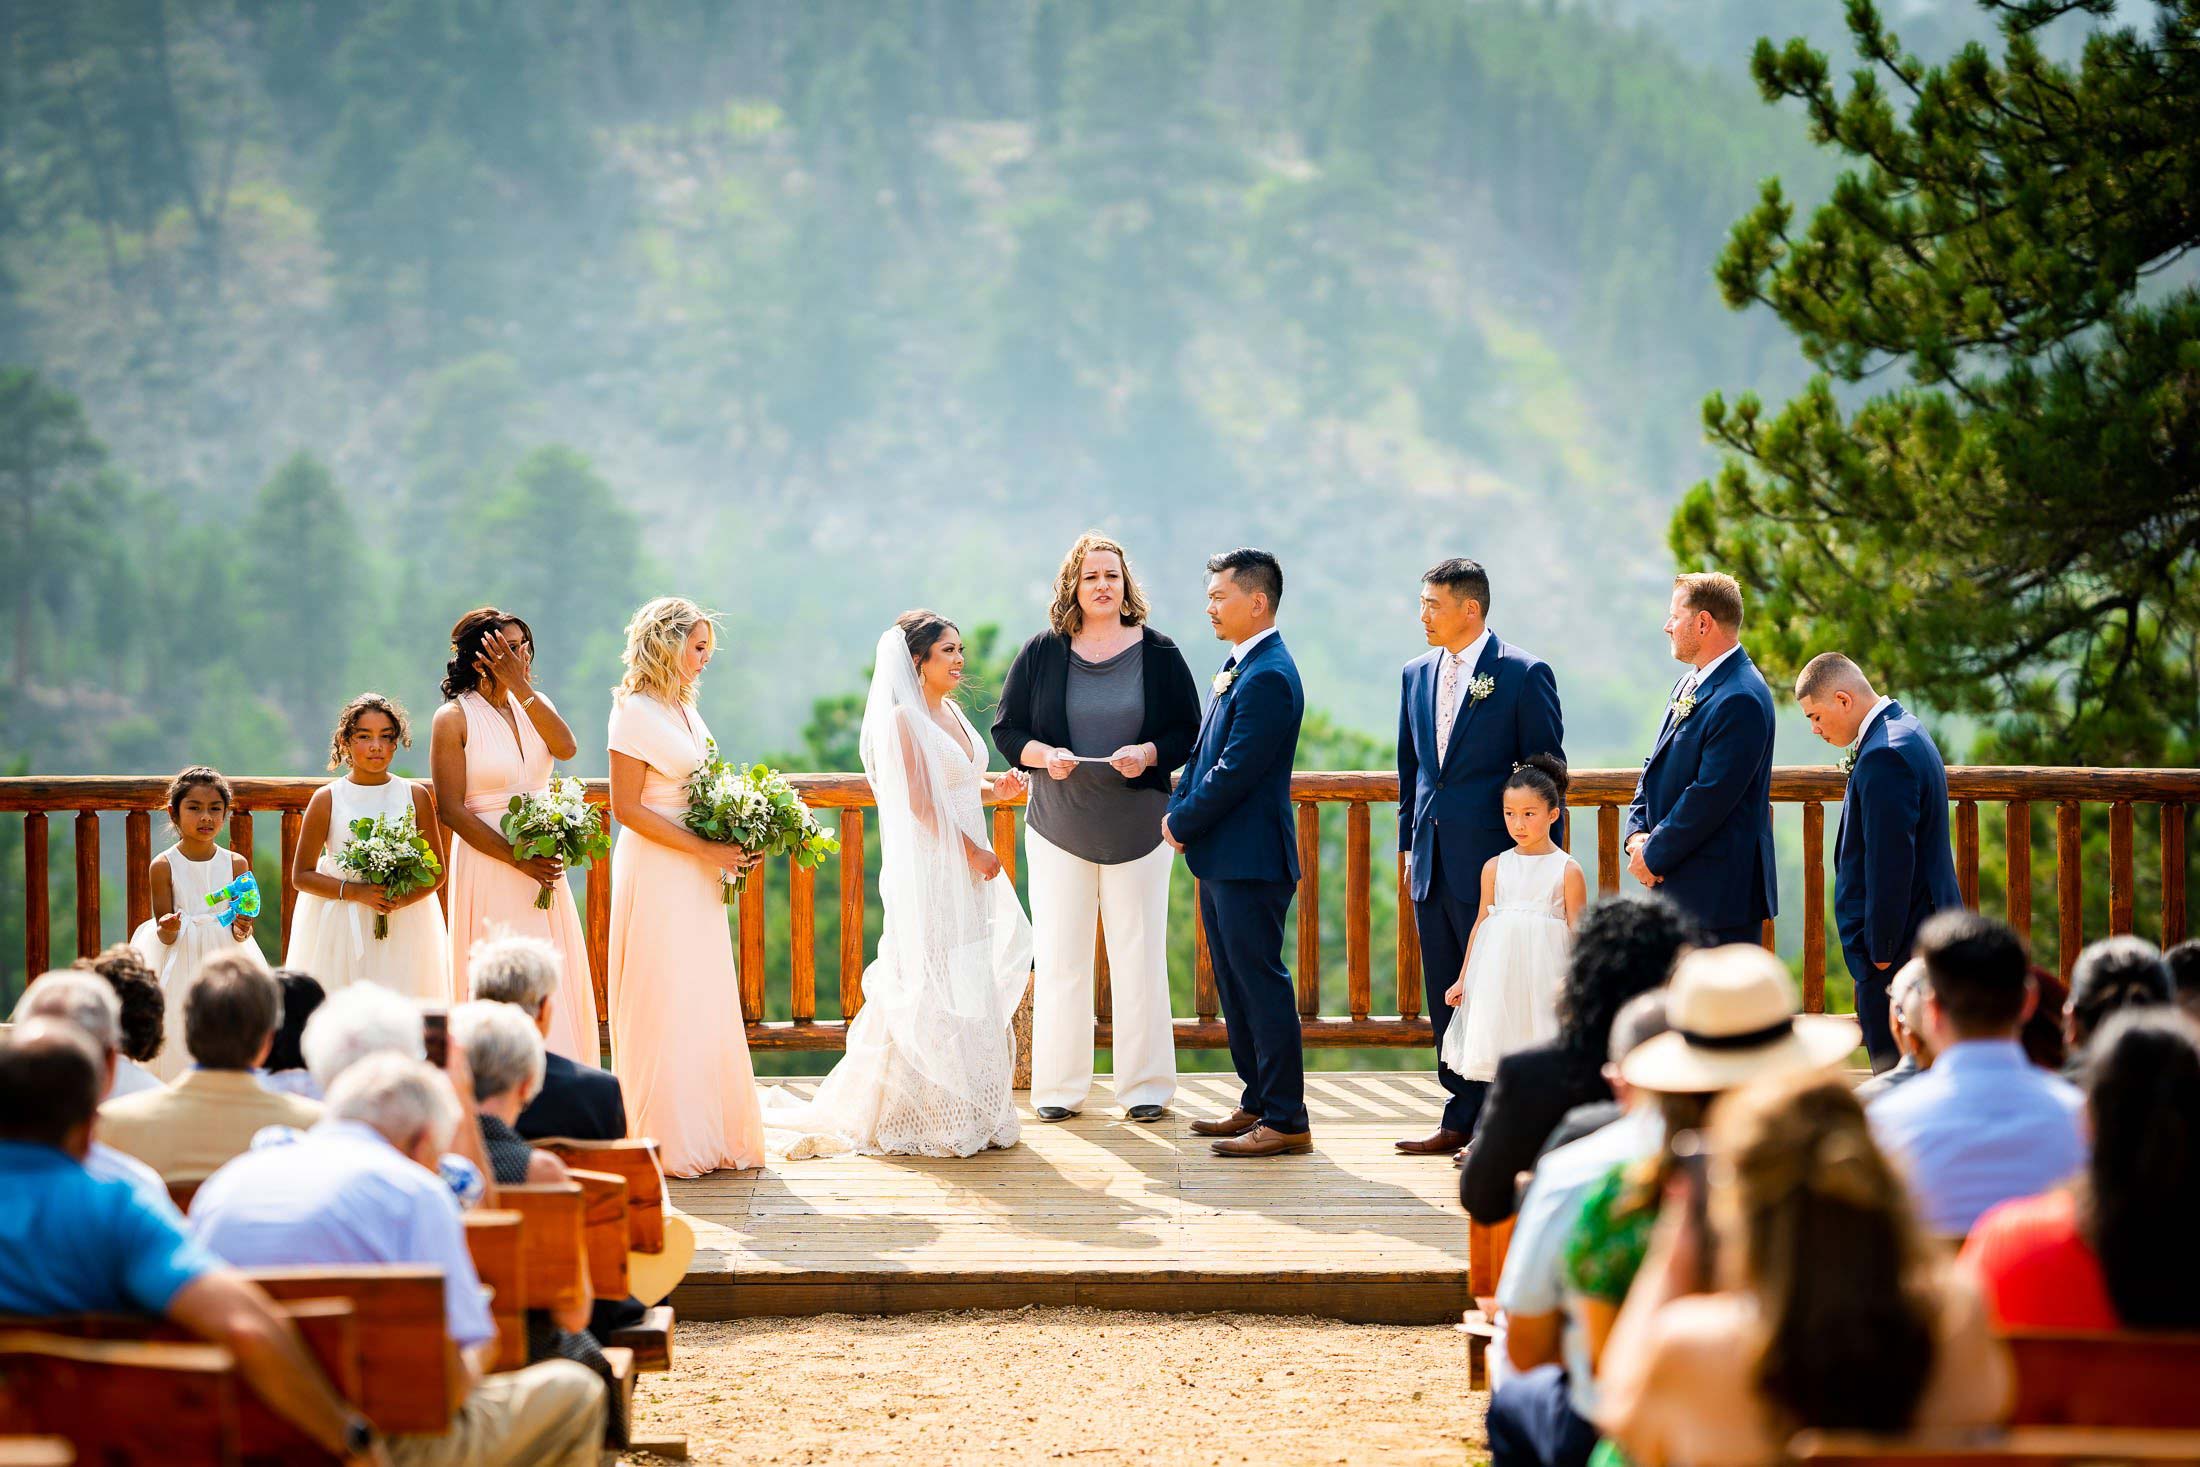 Bride and groom stand before their guests during their wedding ceremony in the mountains, wedding photos, wedding photography, wedding photographer, wedding inspiration, wedding photo inspiration, mountain wedding, YMCA of the Rockies wedding, YMCA of the Rockies wedding photos, YMCA of the Rockies wedding photography, YMCA of the Rockies wedding photographer, YMCA of the Rockies wedding inspiration, YMCA of the Rockies wedding venue, Estes Park wedding, Estes Park wedding photos, Estes Park wedding photography, Estes Park wedding photographer, Colorado wedding, Colorado wedding photos, Colorado wedding photography, Colorado wedding photographer, Colorado mountain wedding, Colorado wedding inspiration